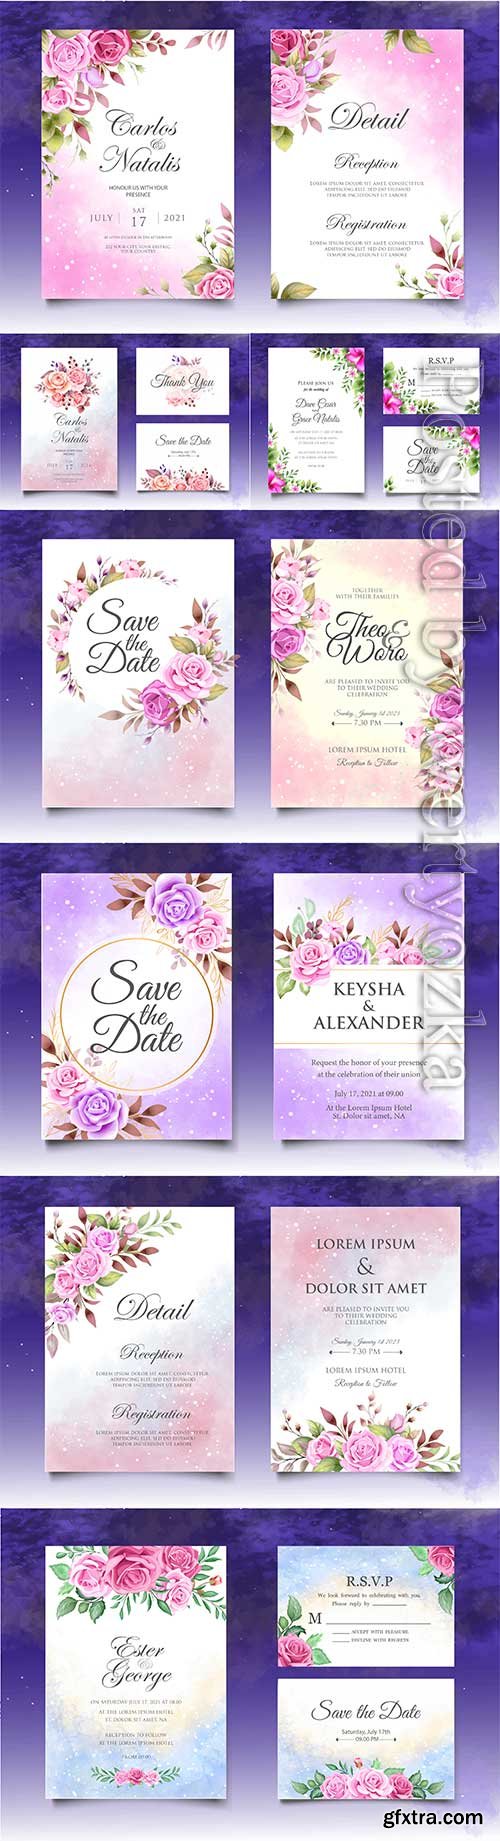 Wedding invitation with red and purple roses